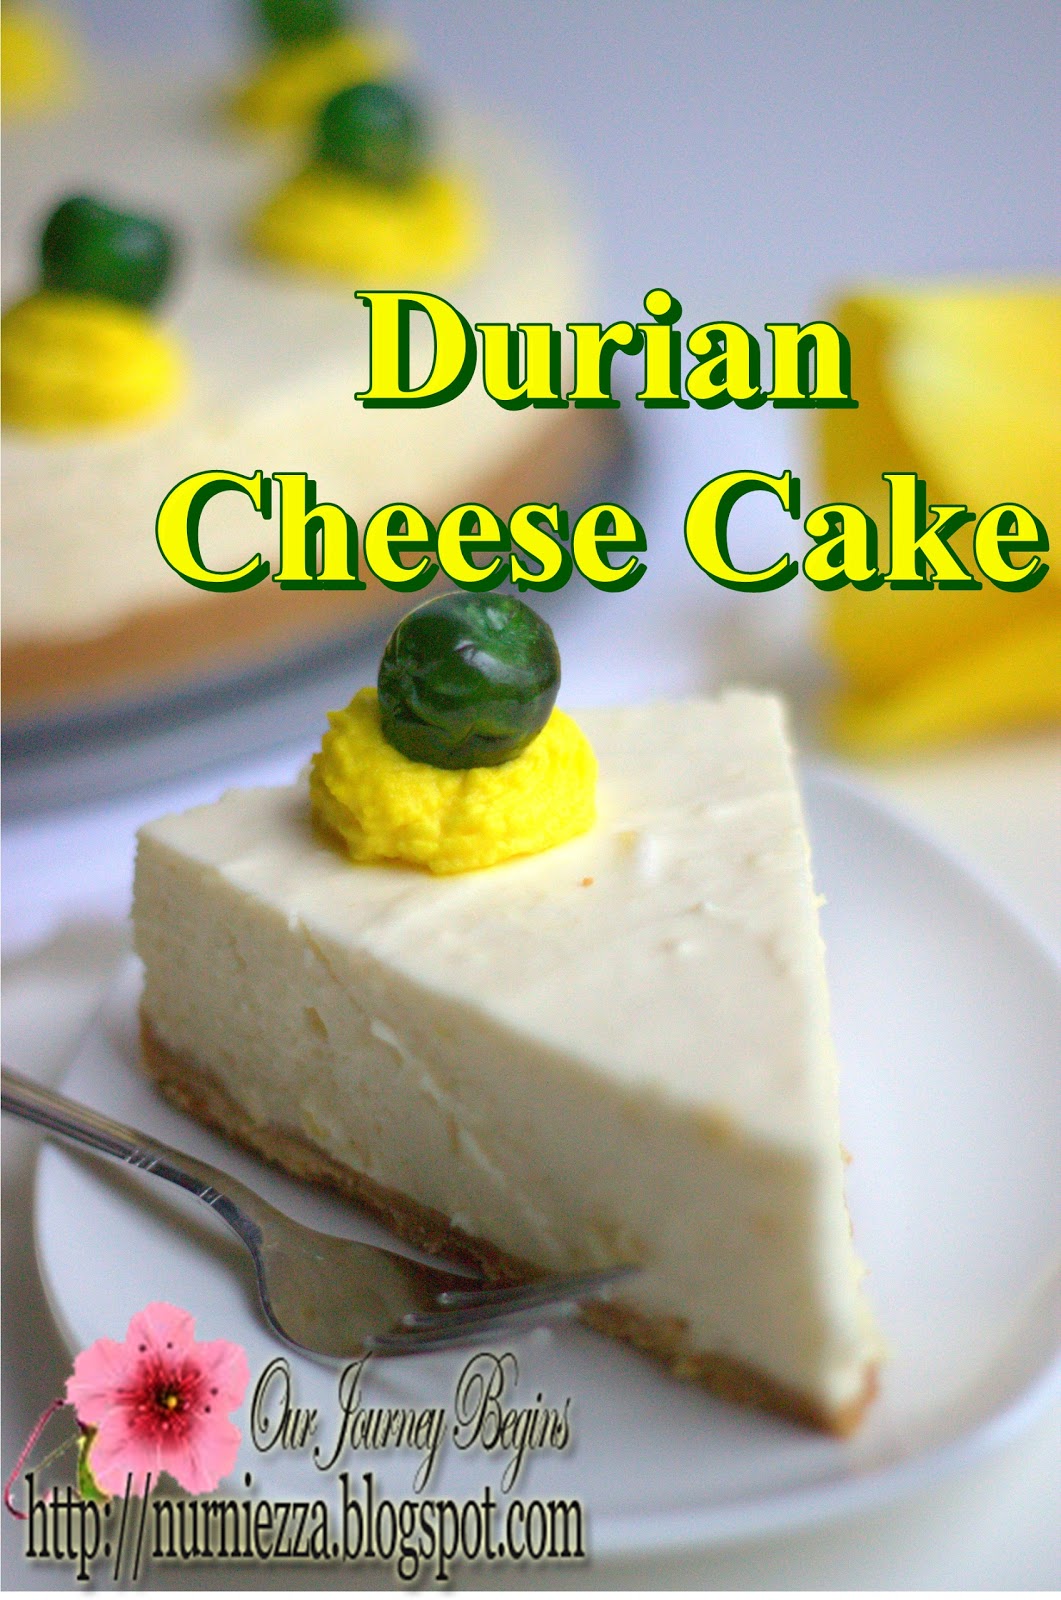 Our Journey Begins: Non - Bake Durian Cheese Cake